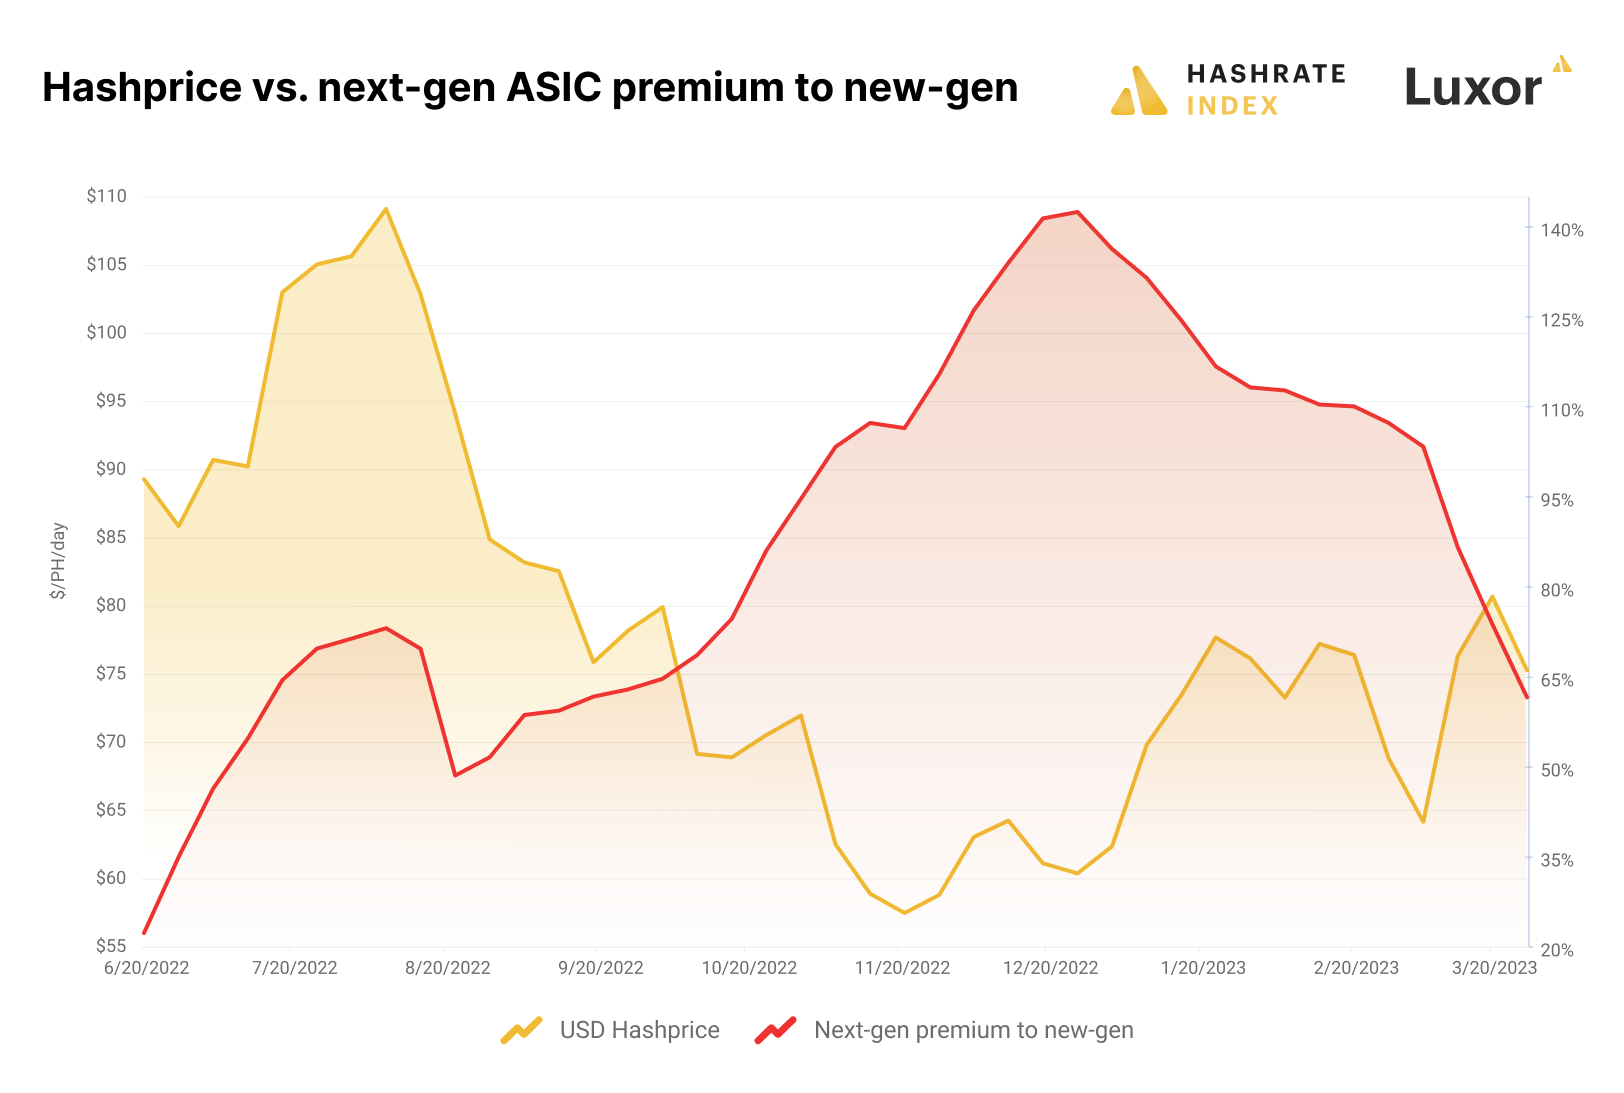 The listing price premium in dollar per terahash ($/TH) of next-gen ASICs compared to new-gen ASICs according to Hashrate Index's ASIC Price Index